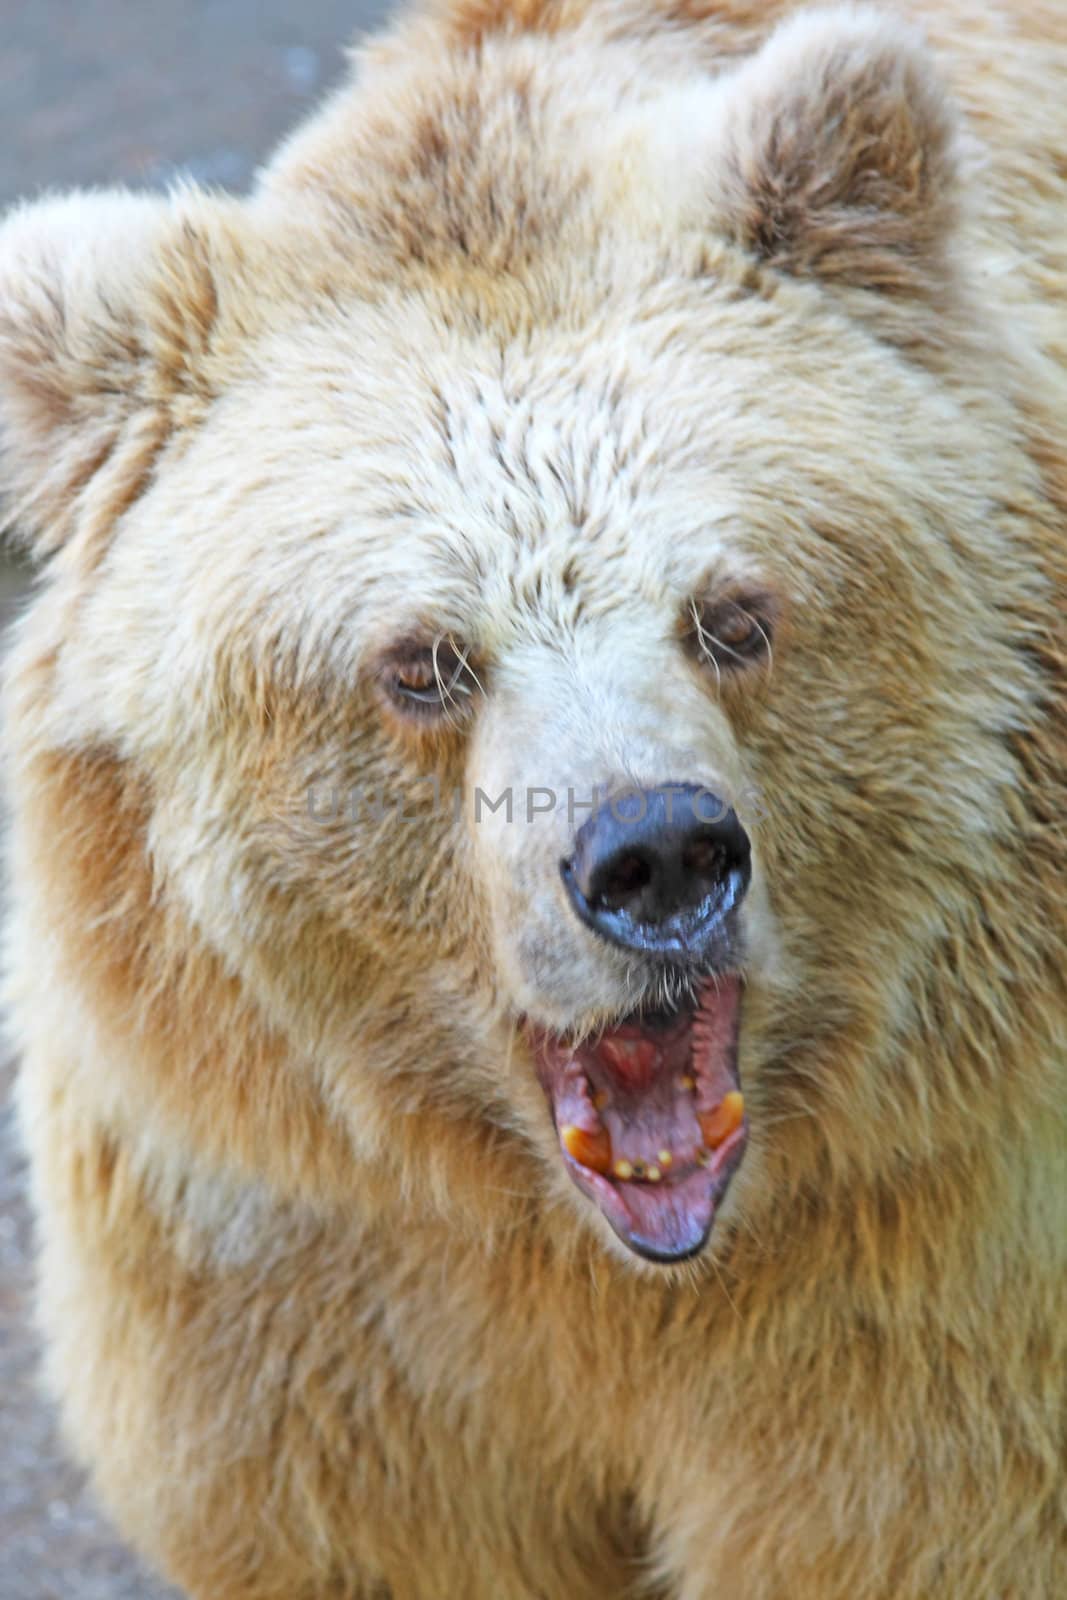 Big angry bear. Negative emotions an danger